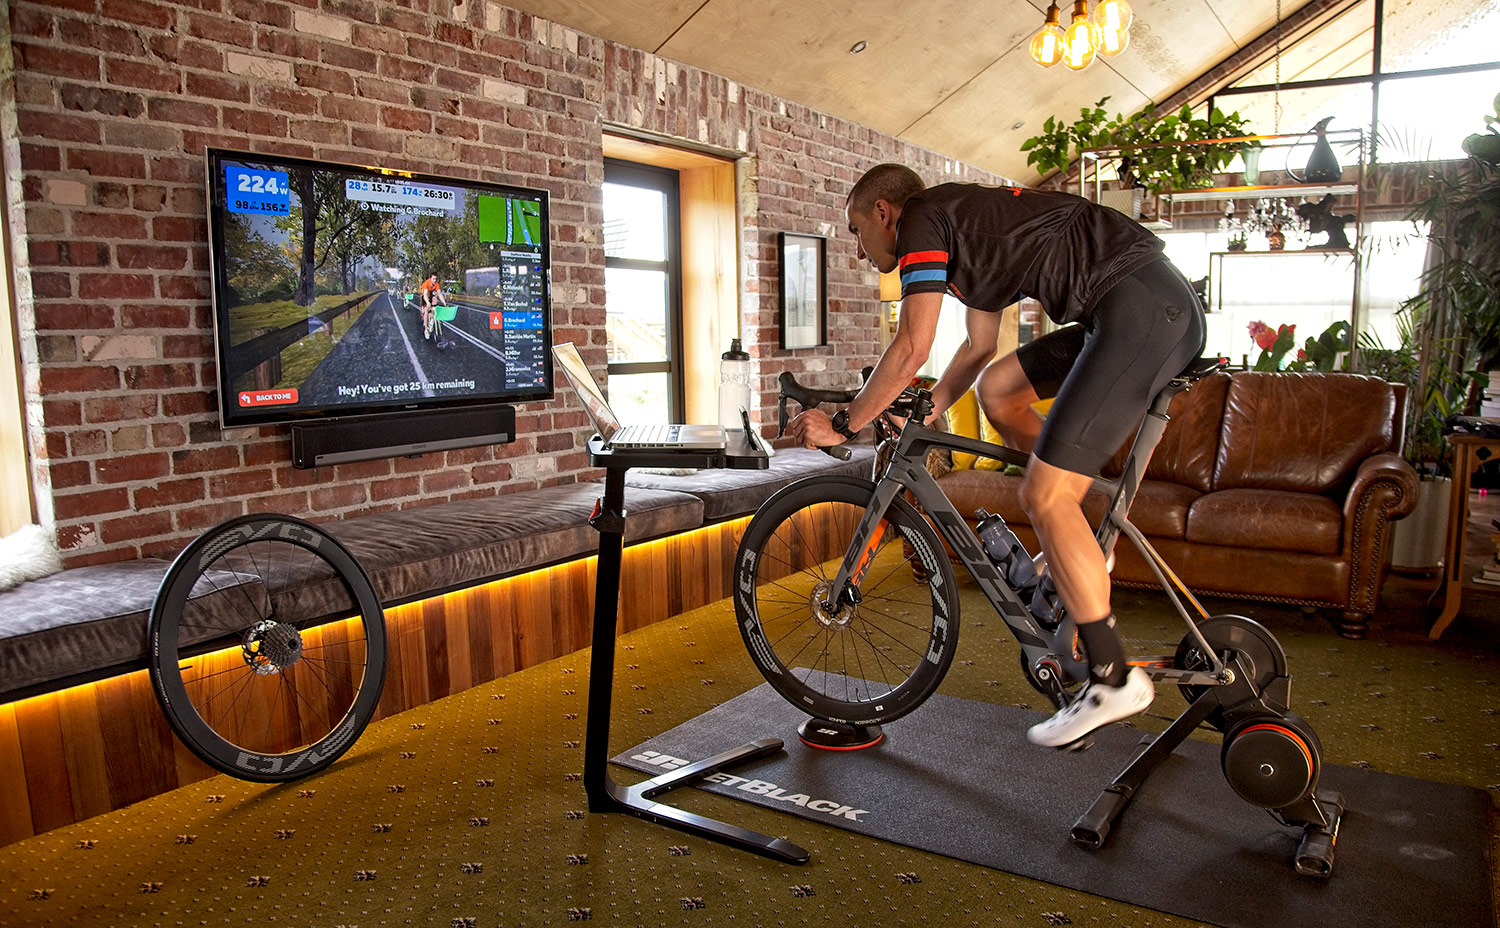 Jet Black Trainer Mat For Indoor Cycling Protects Floors.jpg